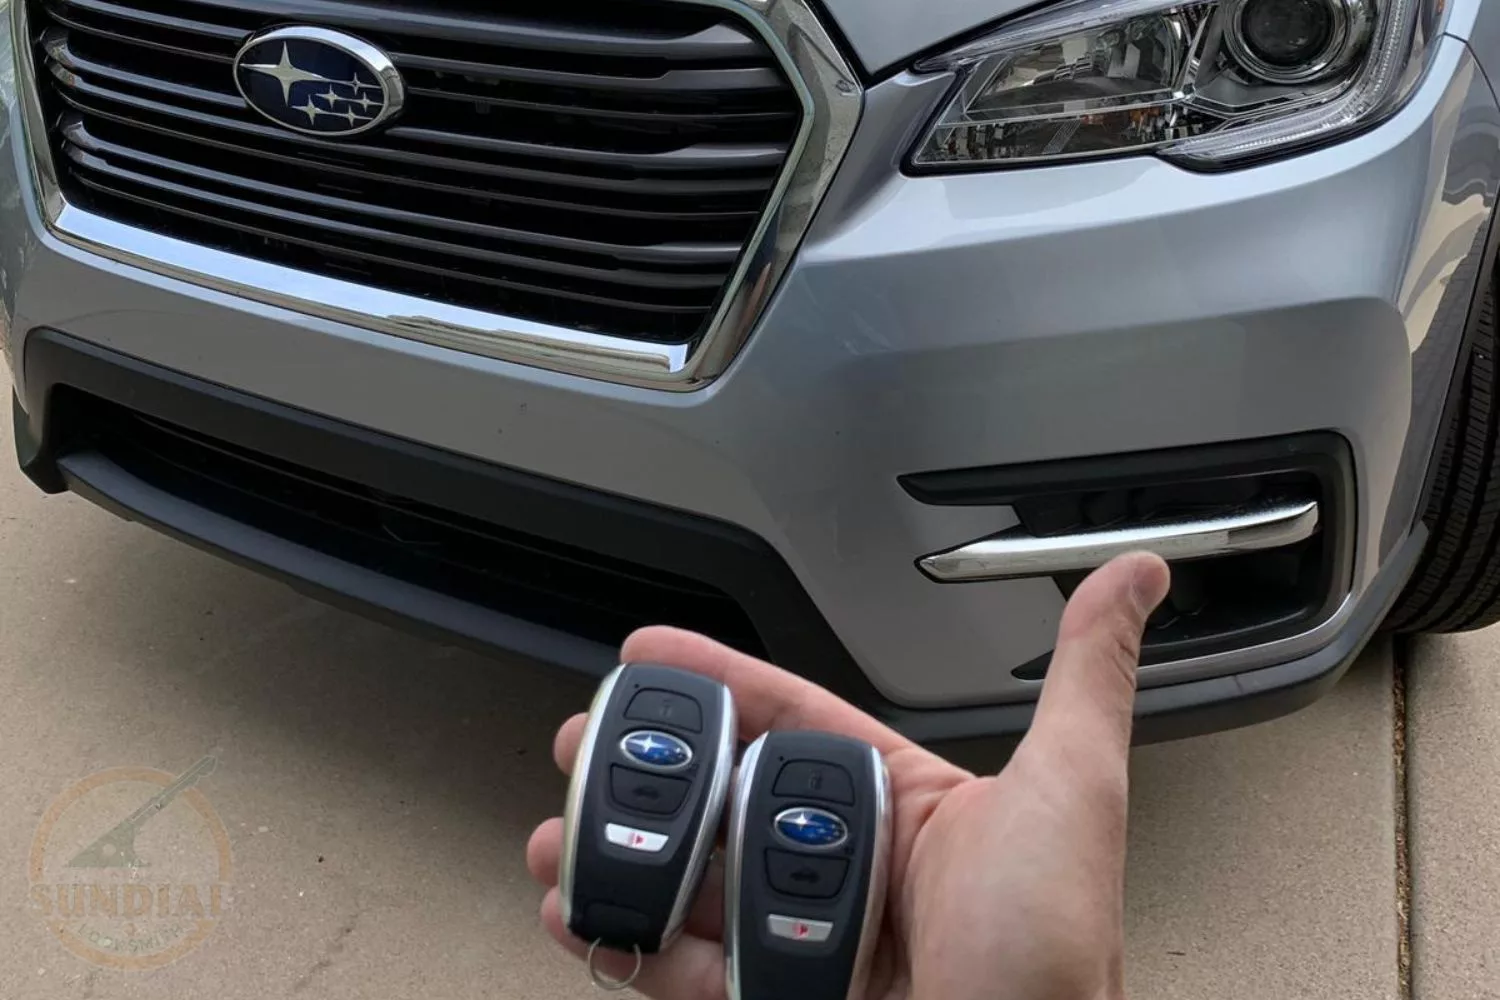 Hand holding Subaru car keys in front of vehicle